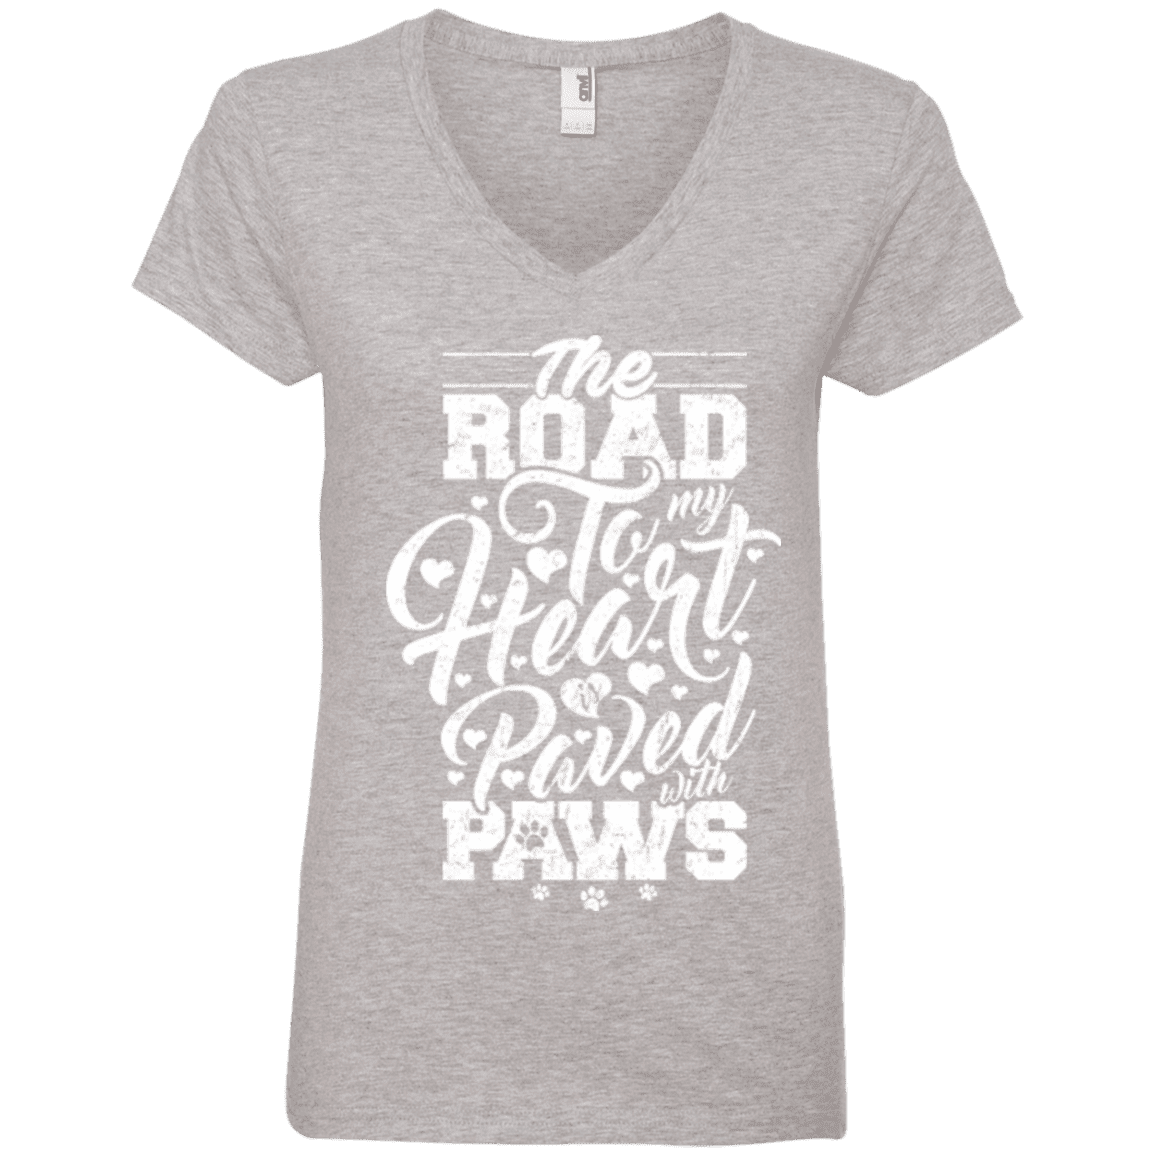 Road To My Heart Paved With Paws - Ladies V Neck.